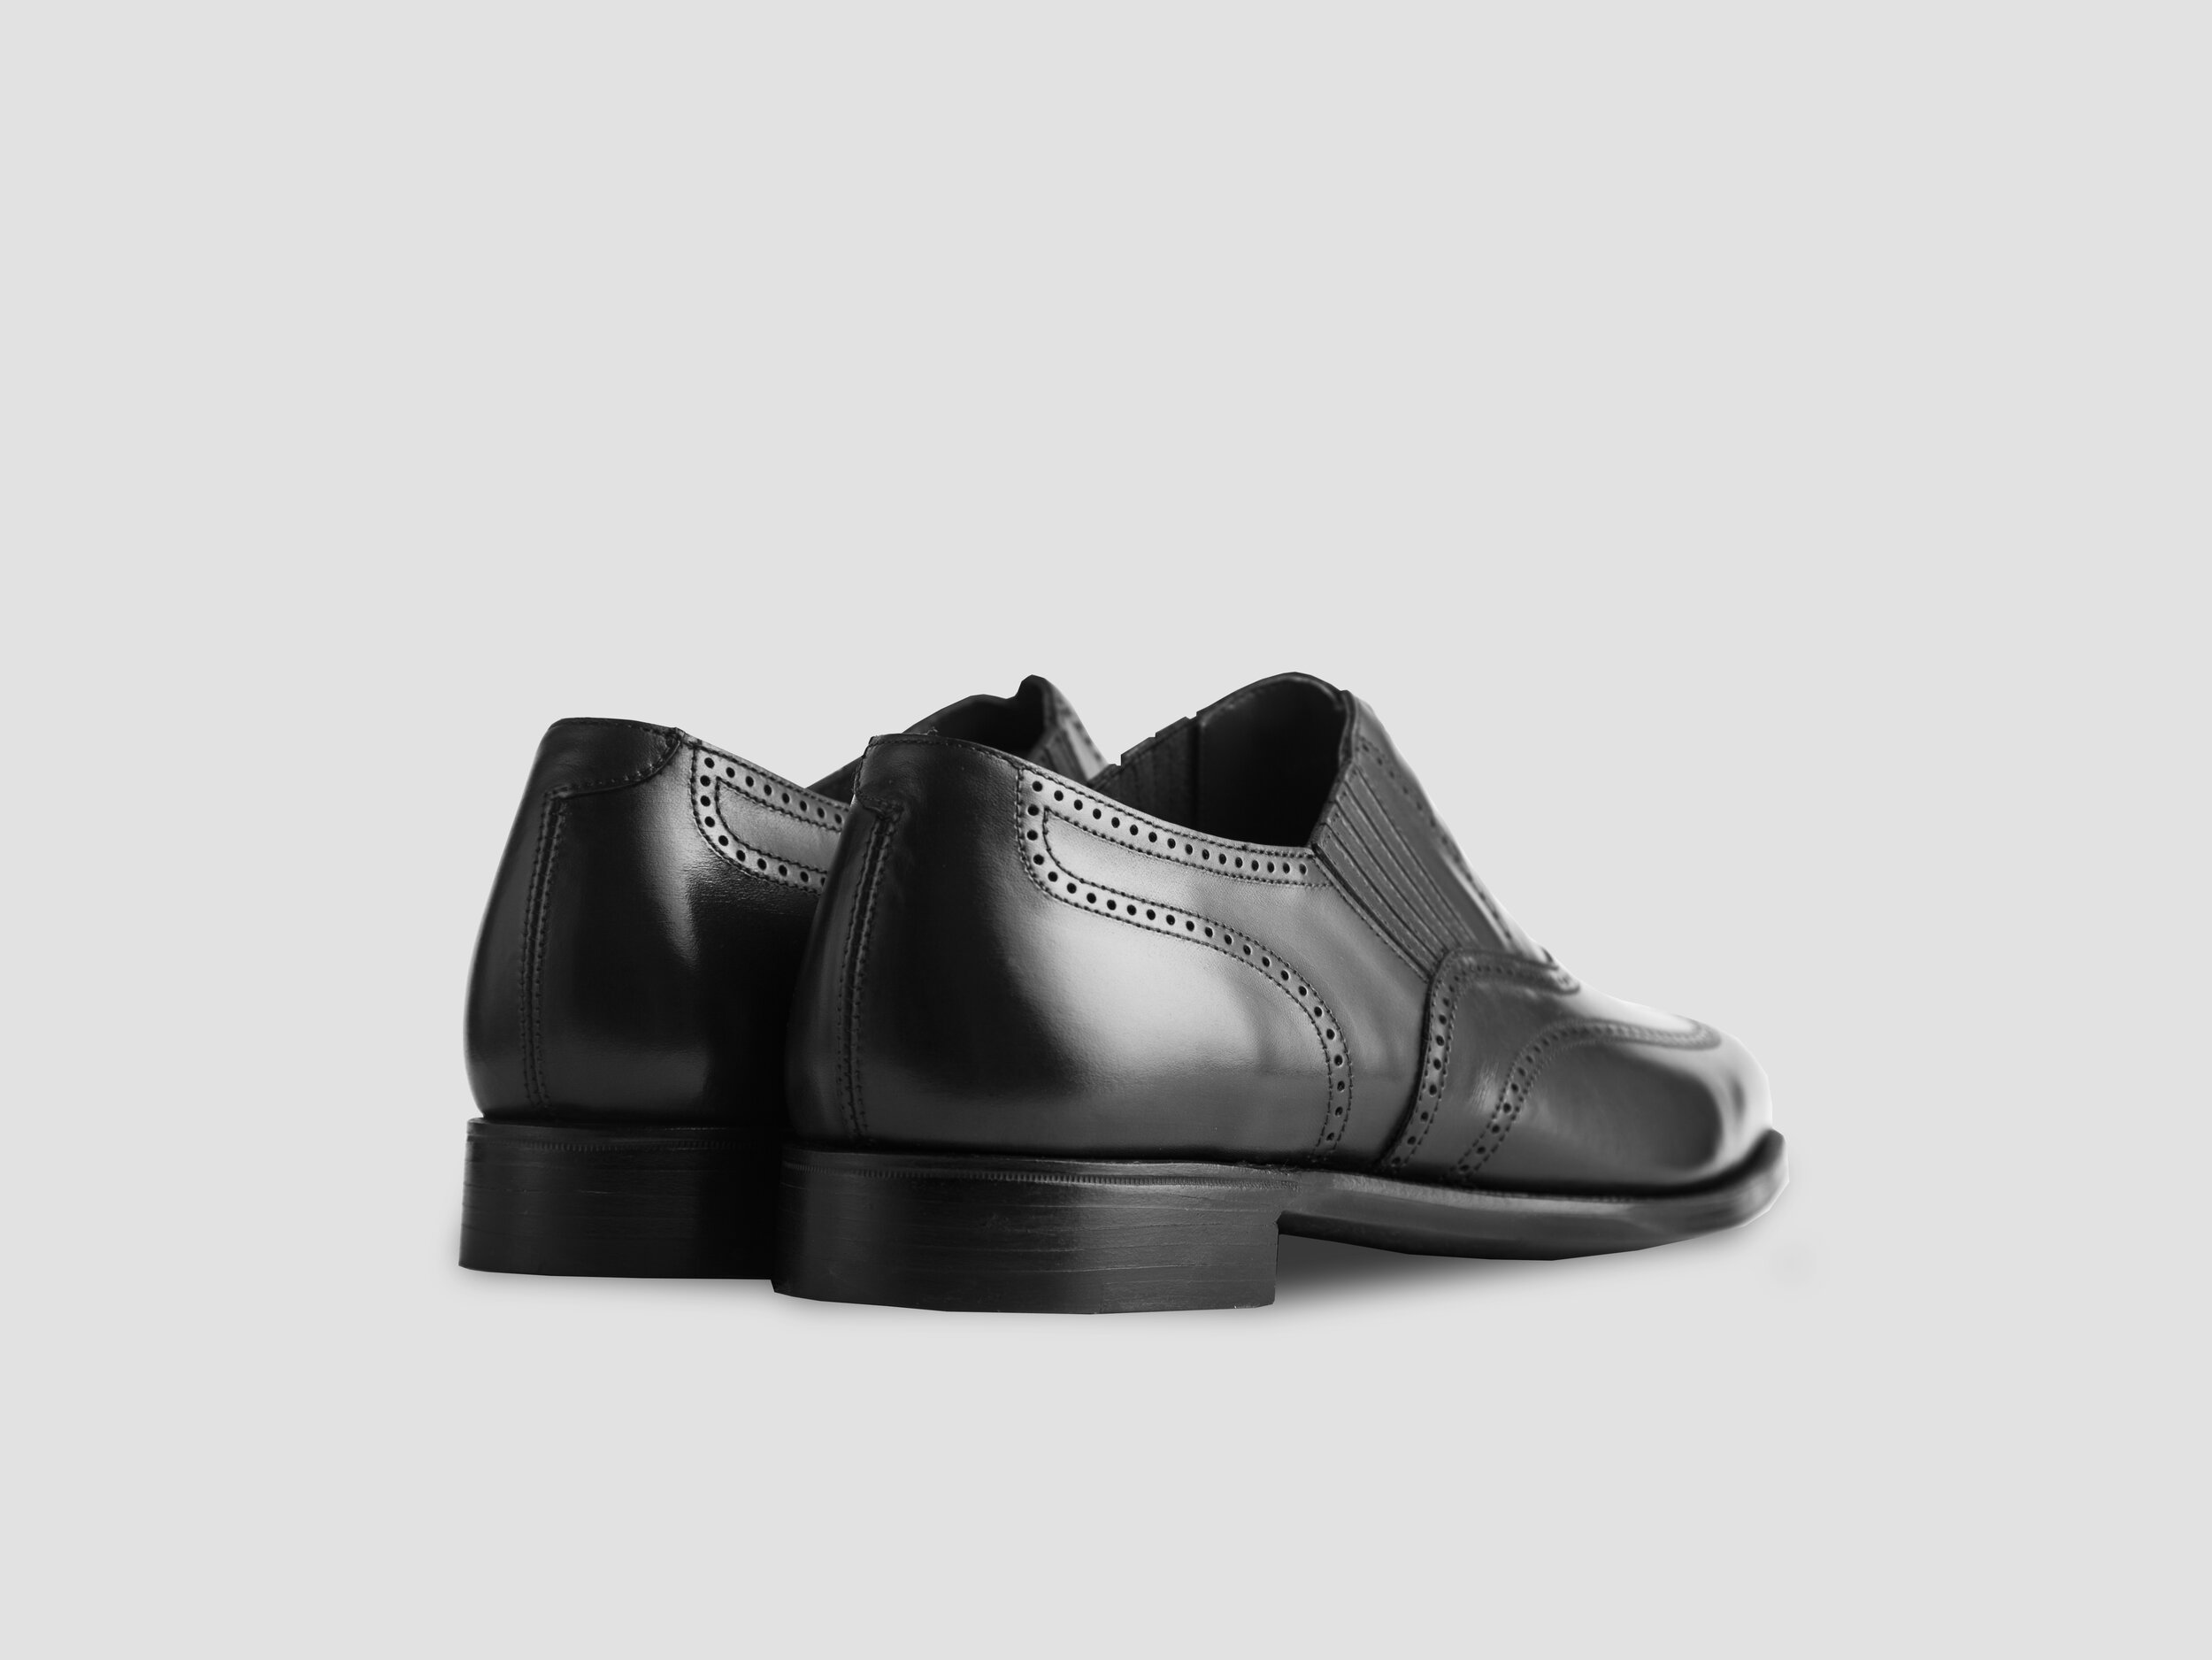 Winston Cherry Brogue Oxford Leather Shoes